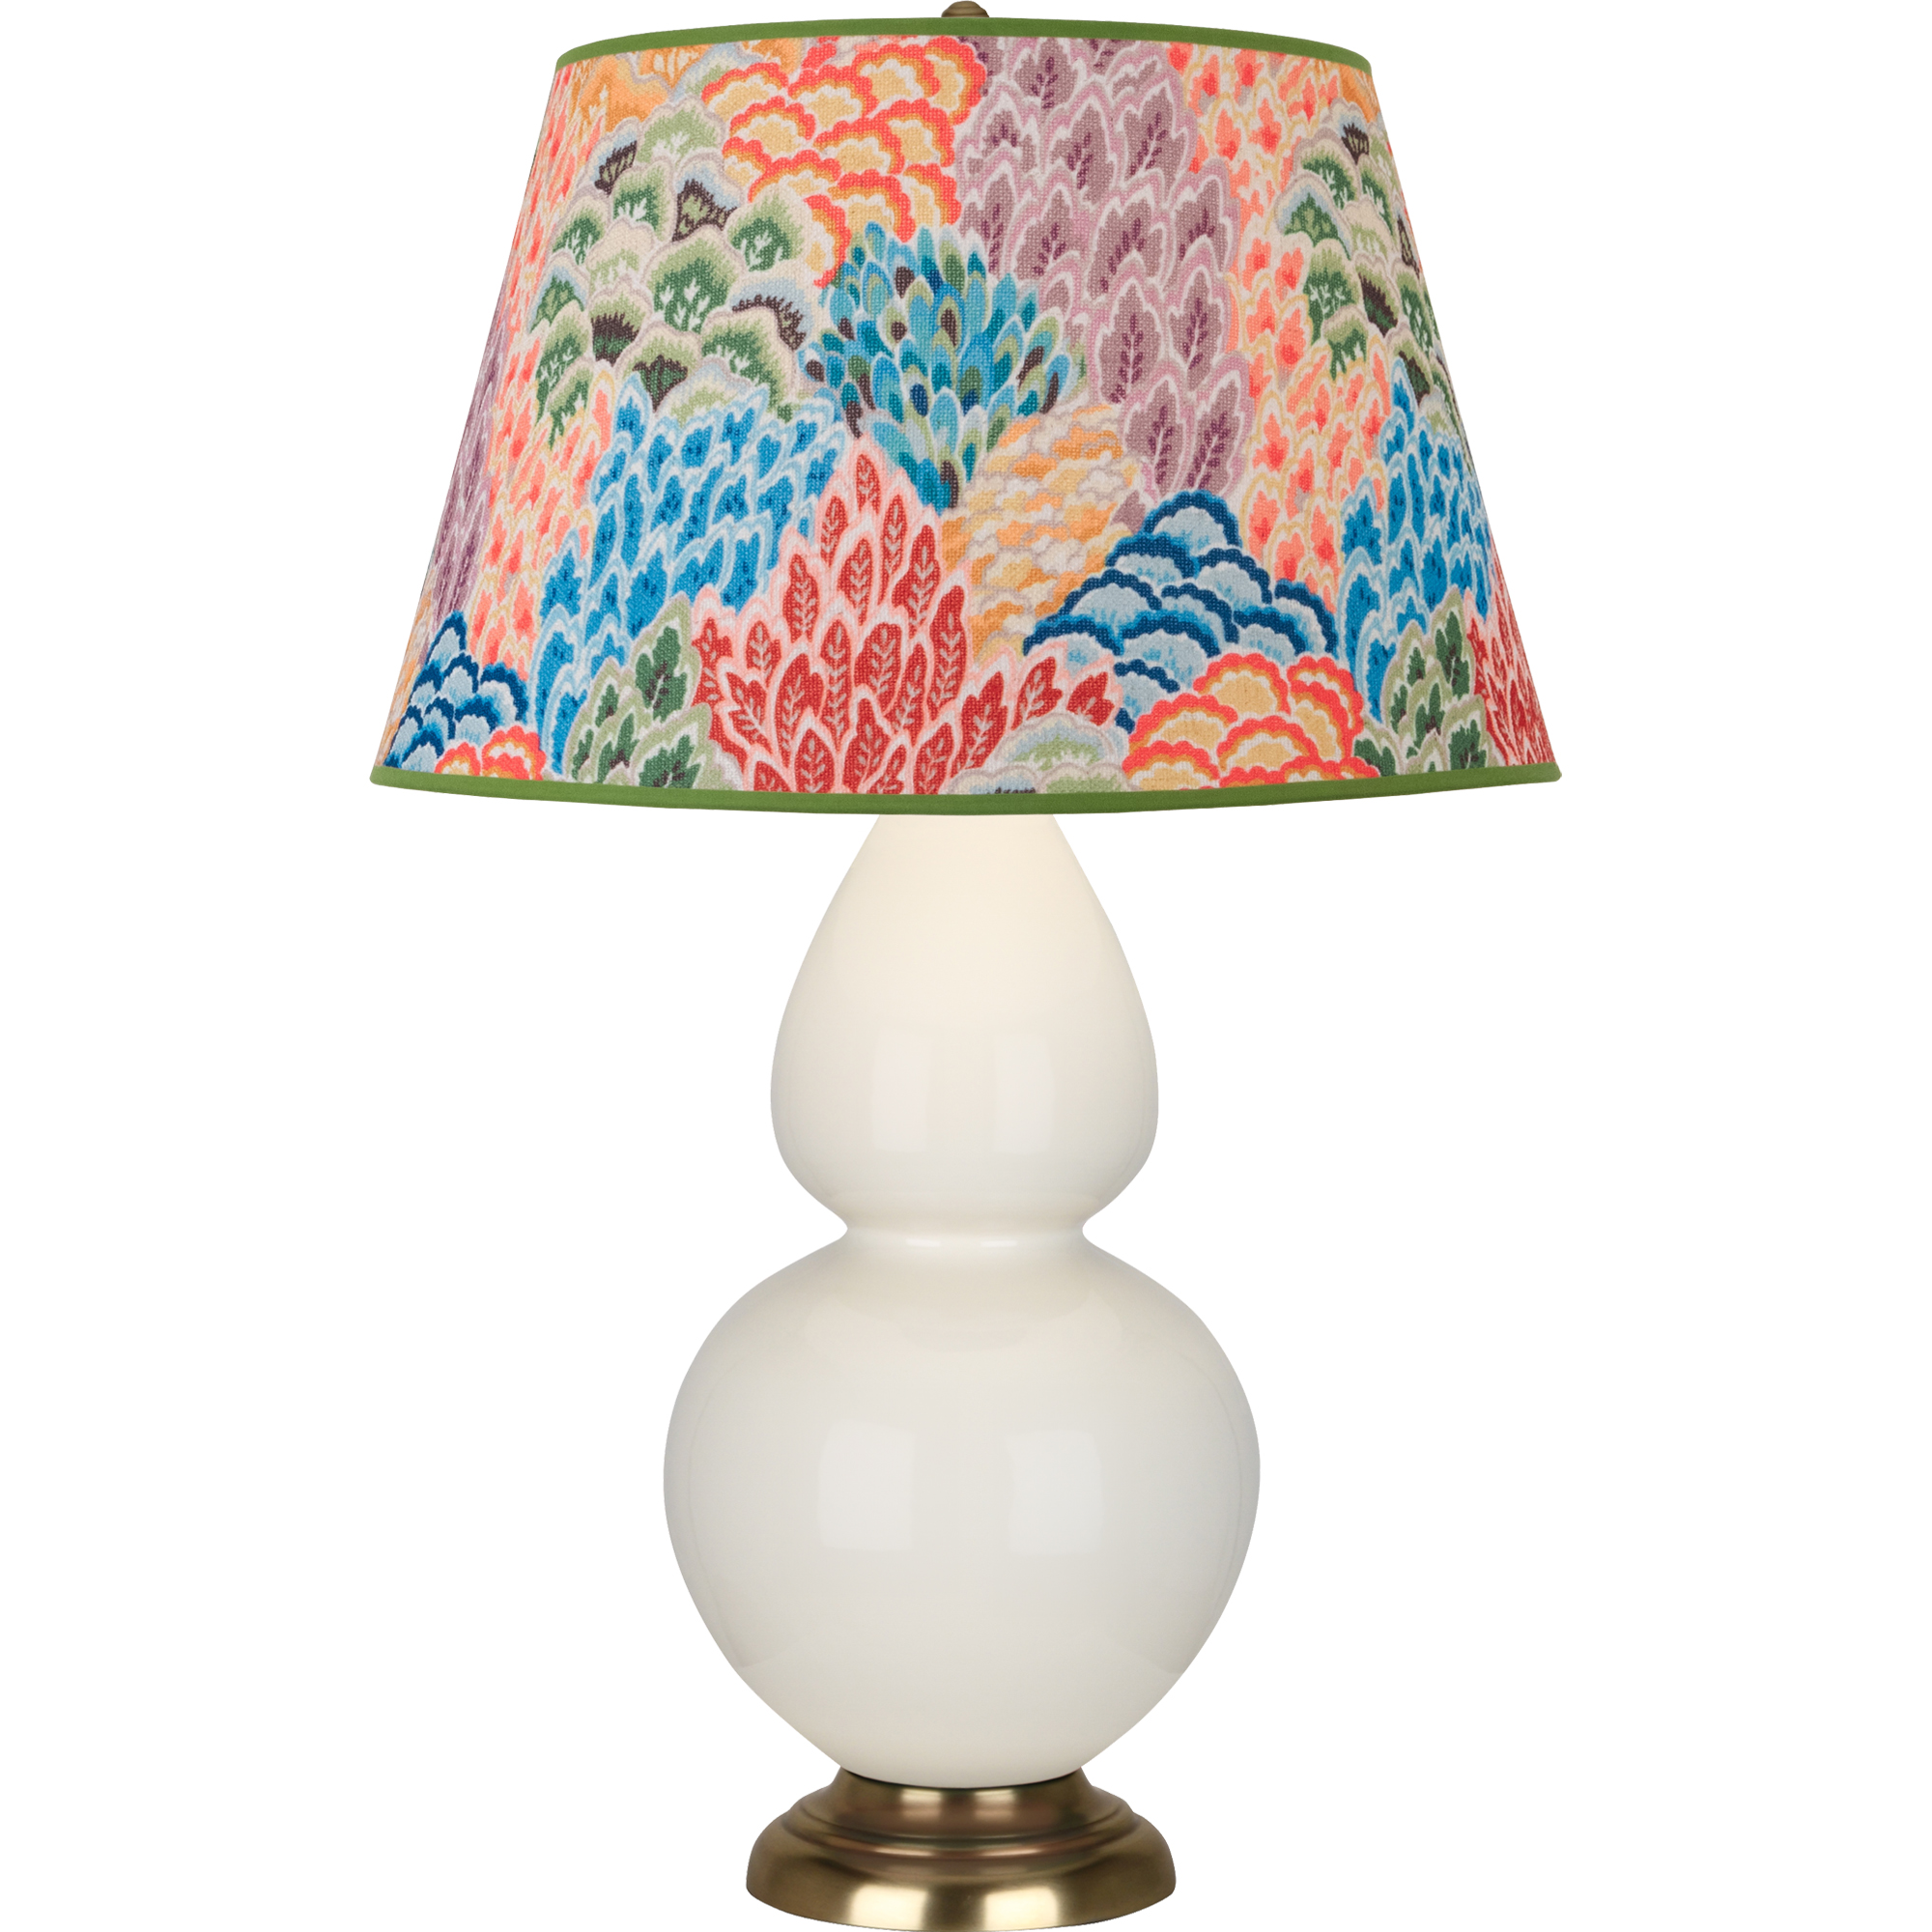 Double Gourd Table Lamp Style #1754S